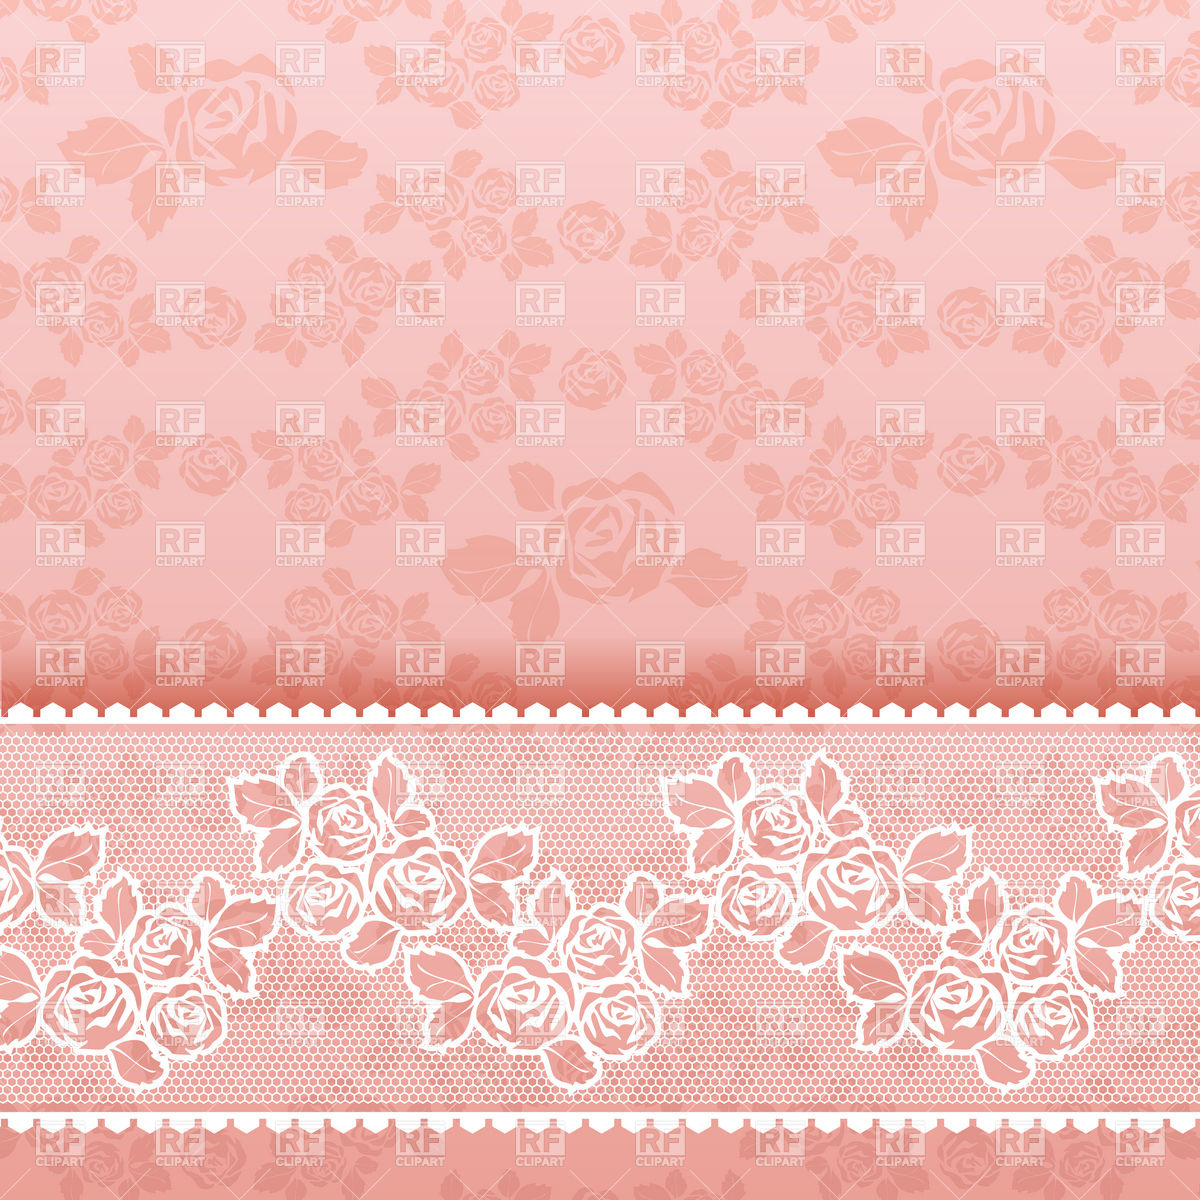 Vintage Wallpaper With Roses Download Royalty Free Vector Clipart    